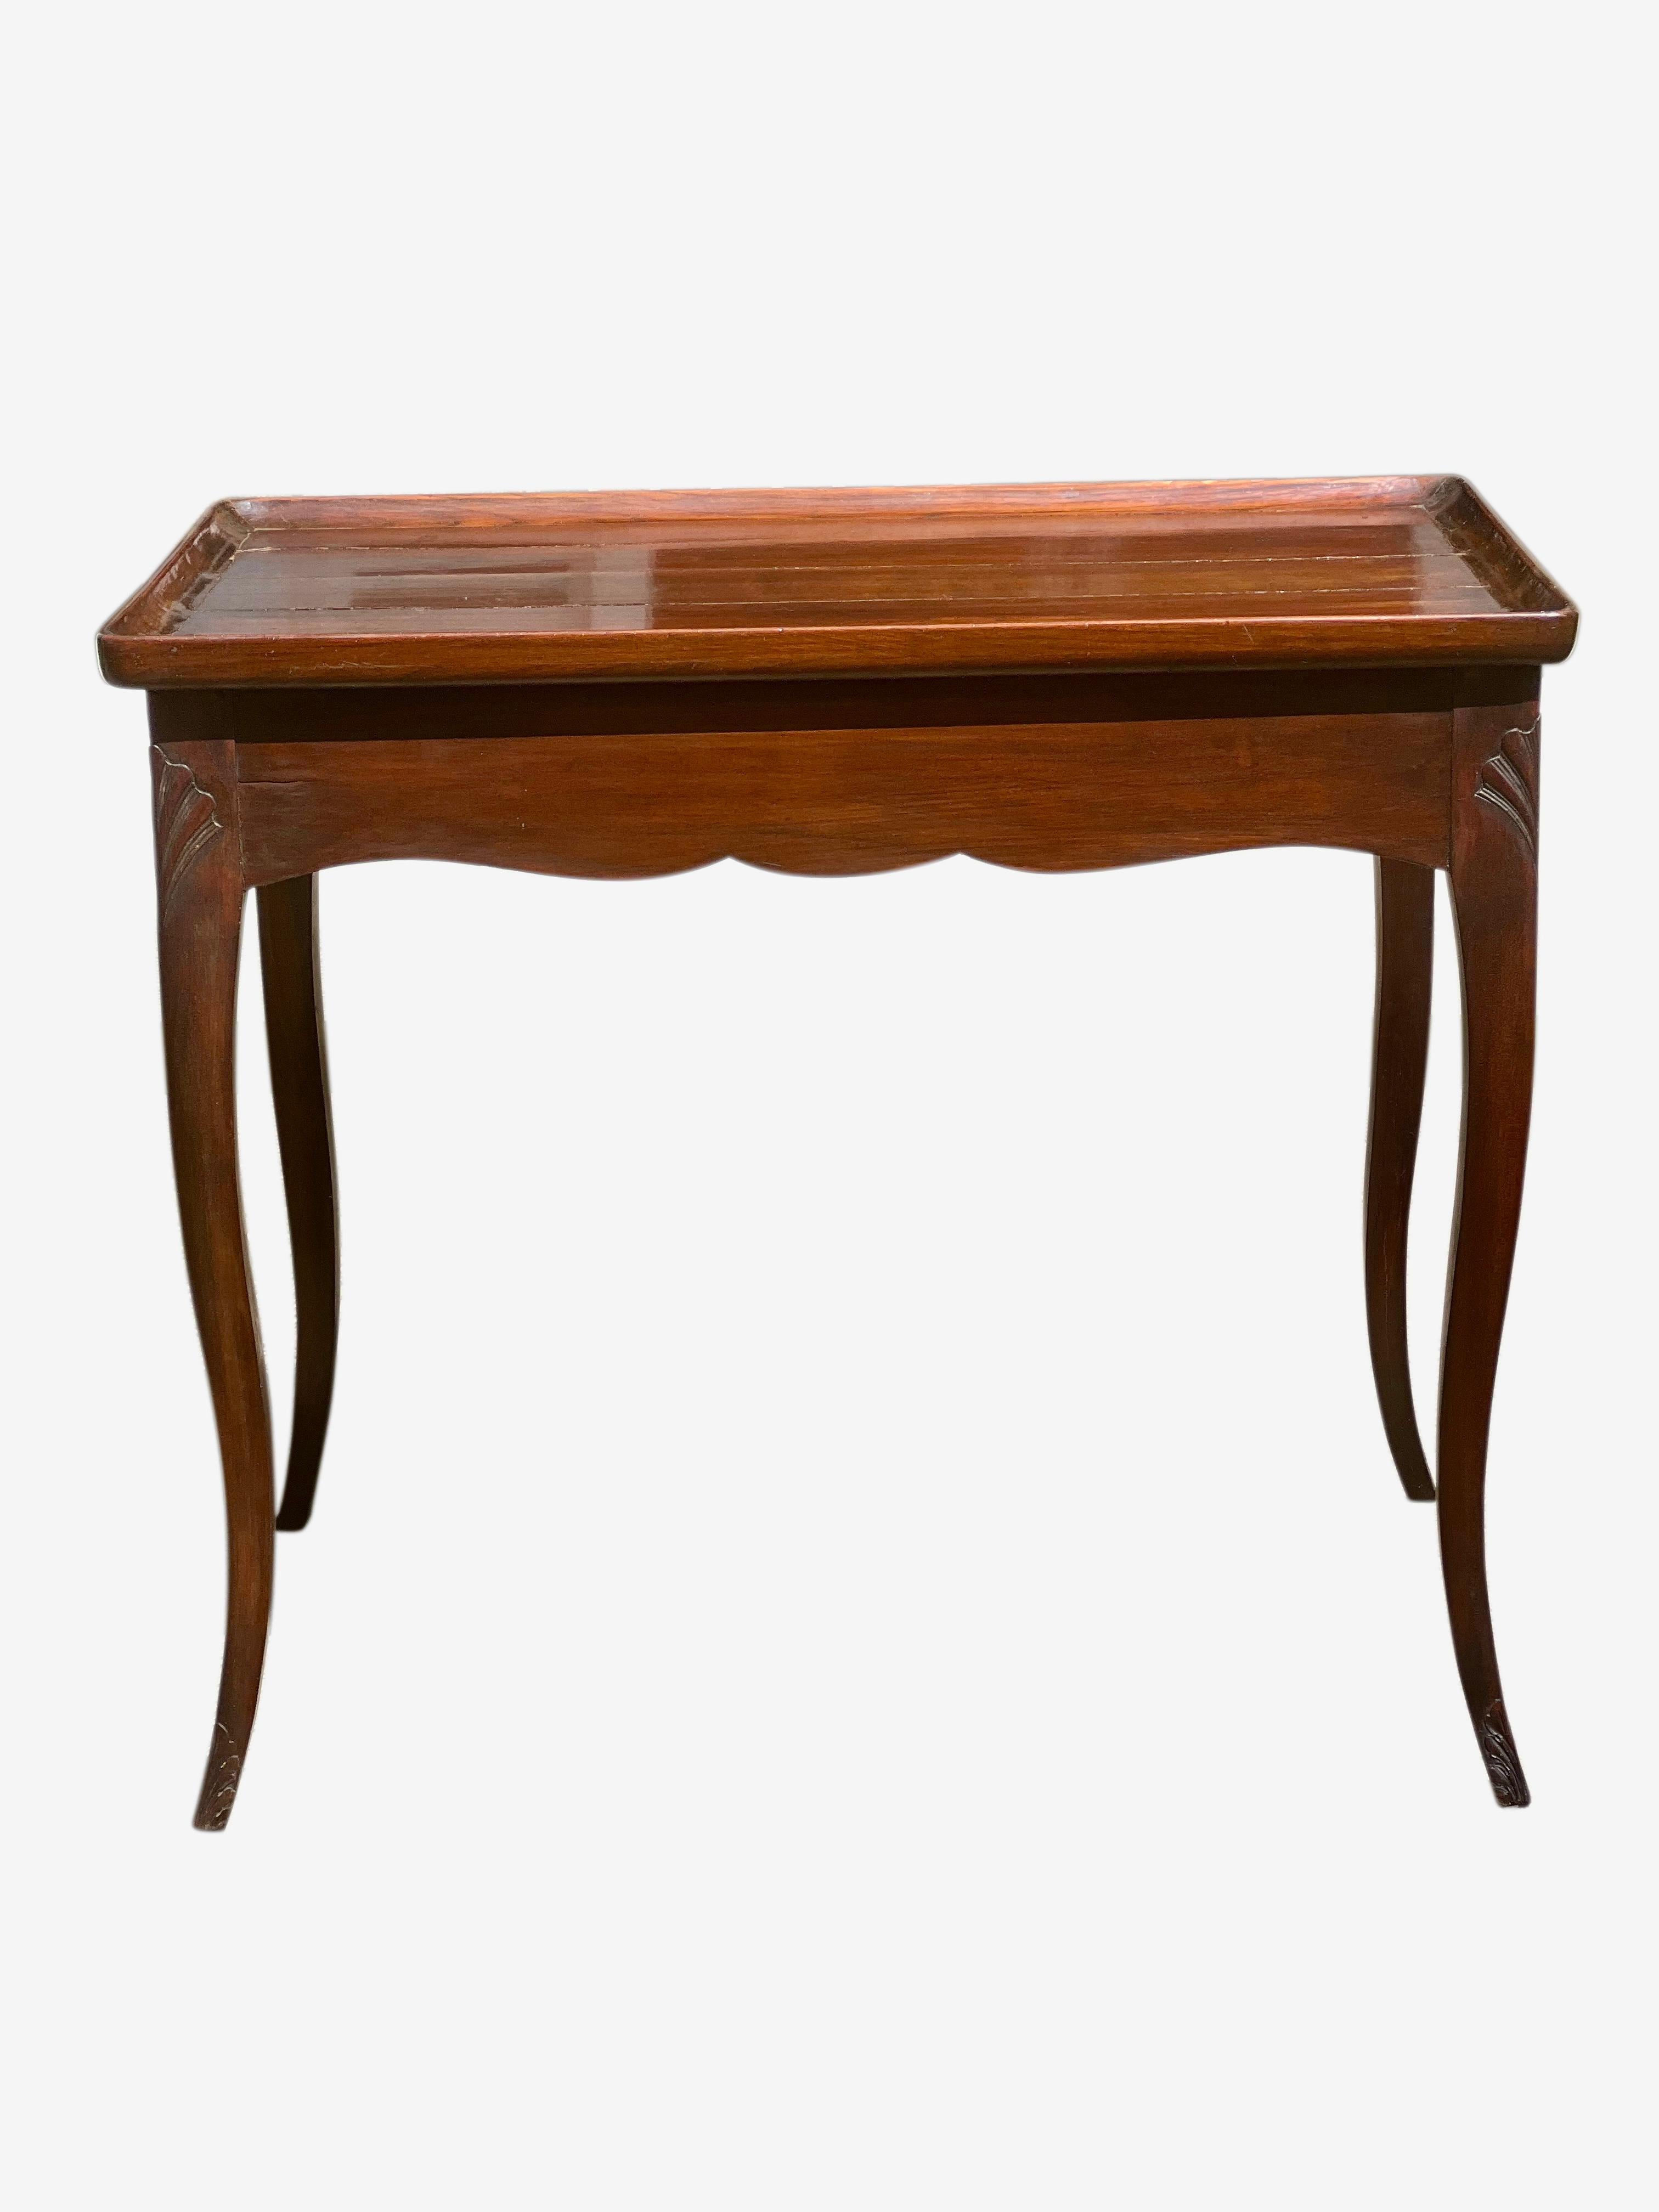 Antique French Provincial Mahogany Louis XV Style Tea Table, circa 1900 For Sale 1